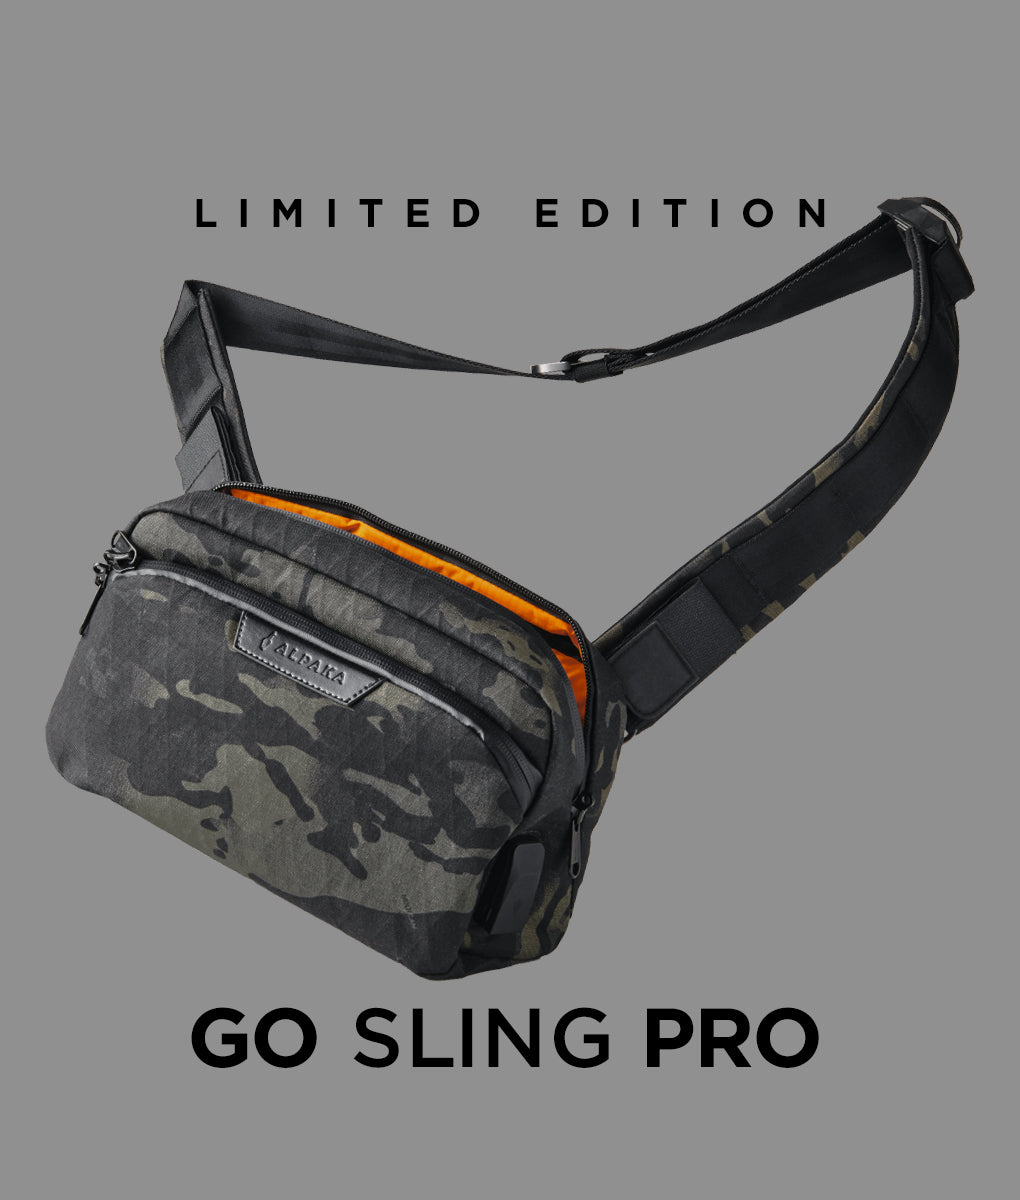 Limited Edition Go Sling Pro